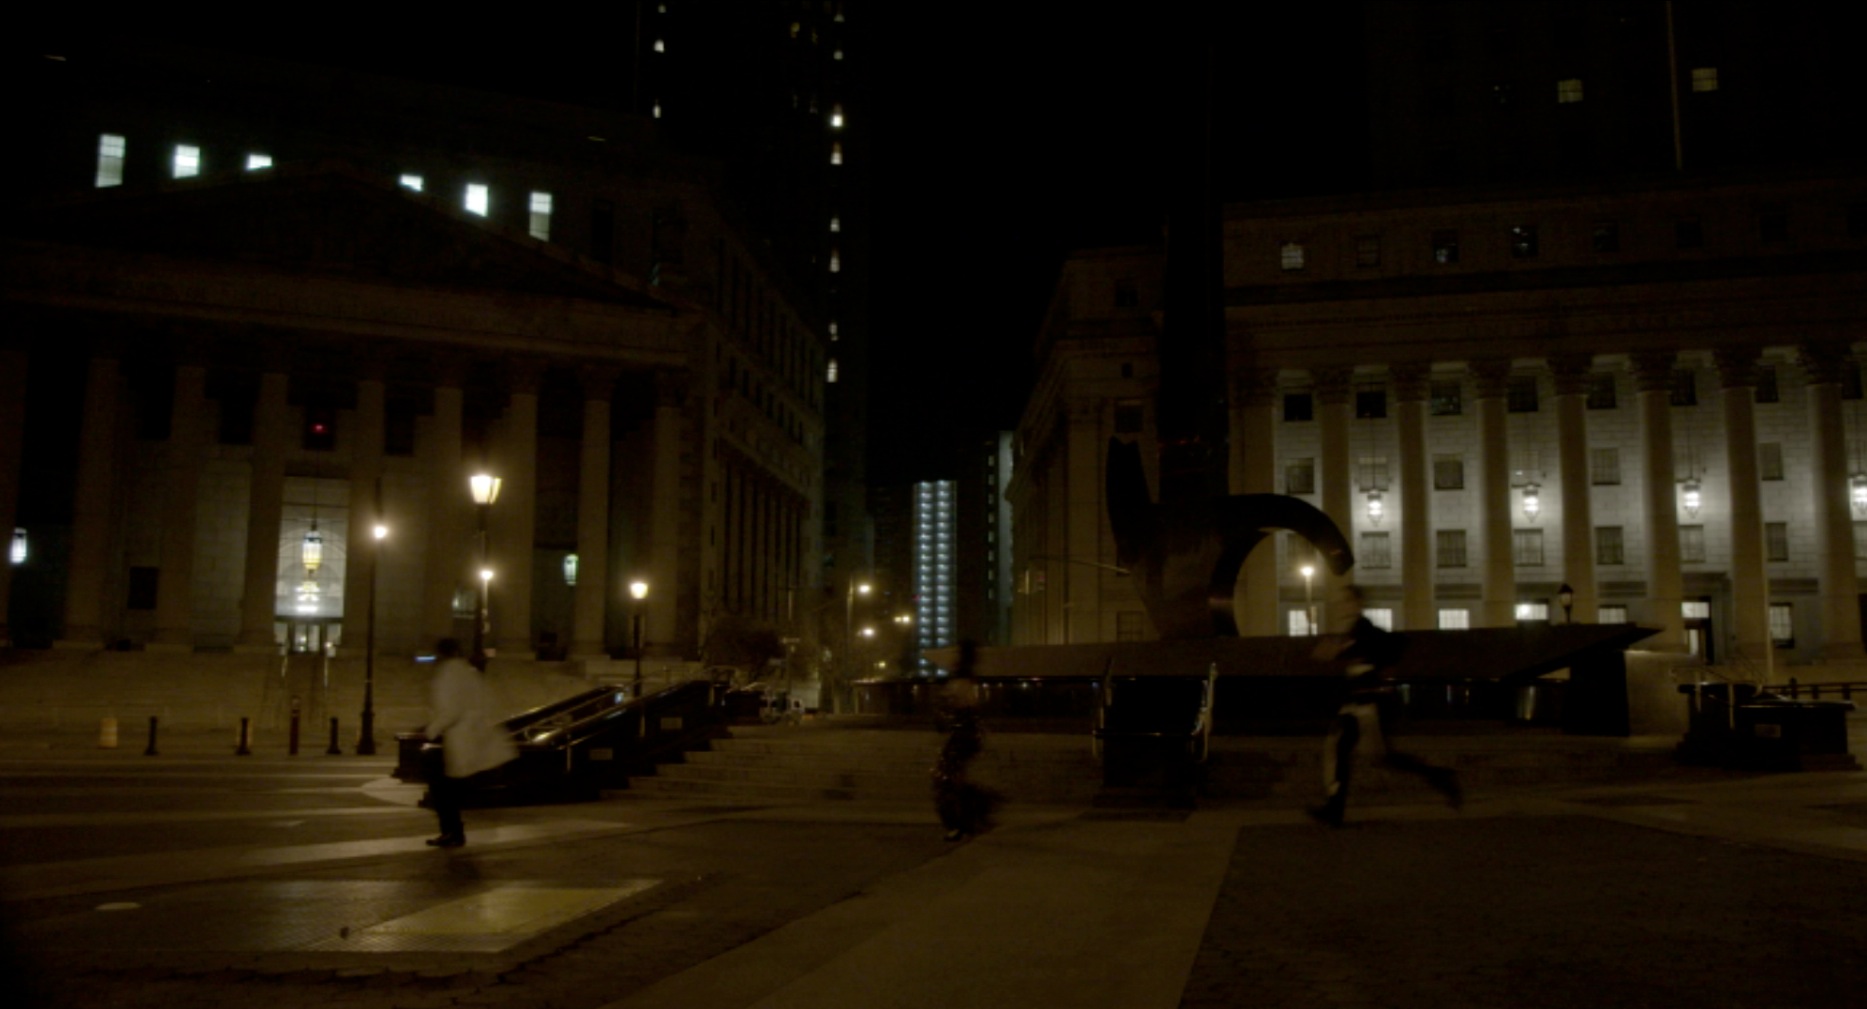  The director of this film has somewhat of an infatuation with New York City's Financial District. Both films I've shot for him feature its architecture pretty prominently. For this shot toward the end of Dominik's journey, I composed it with the cit